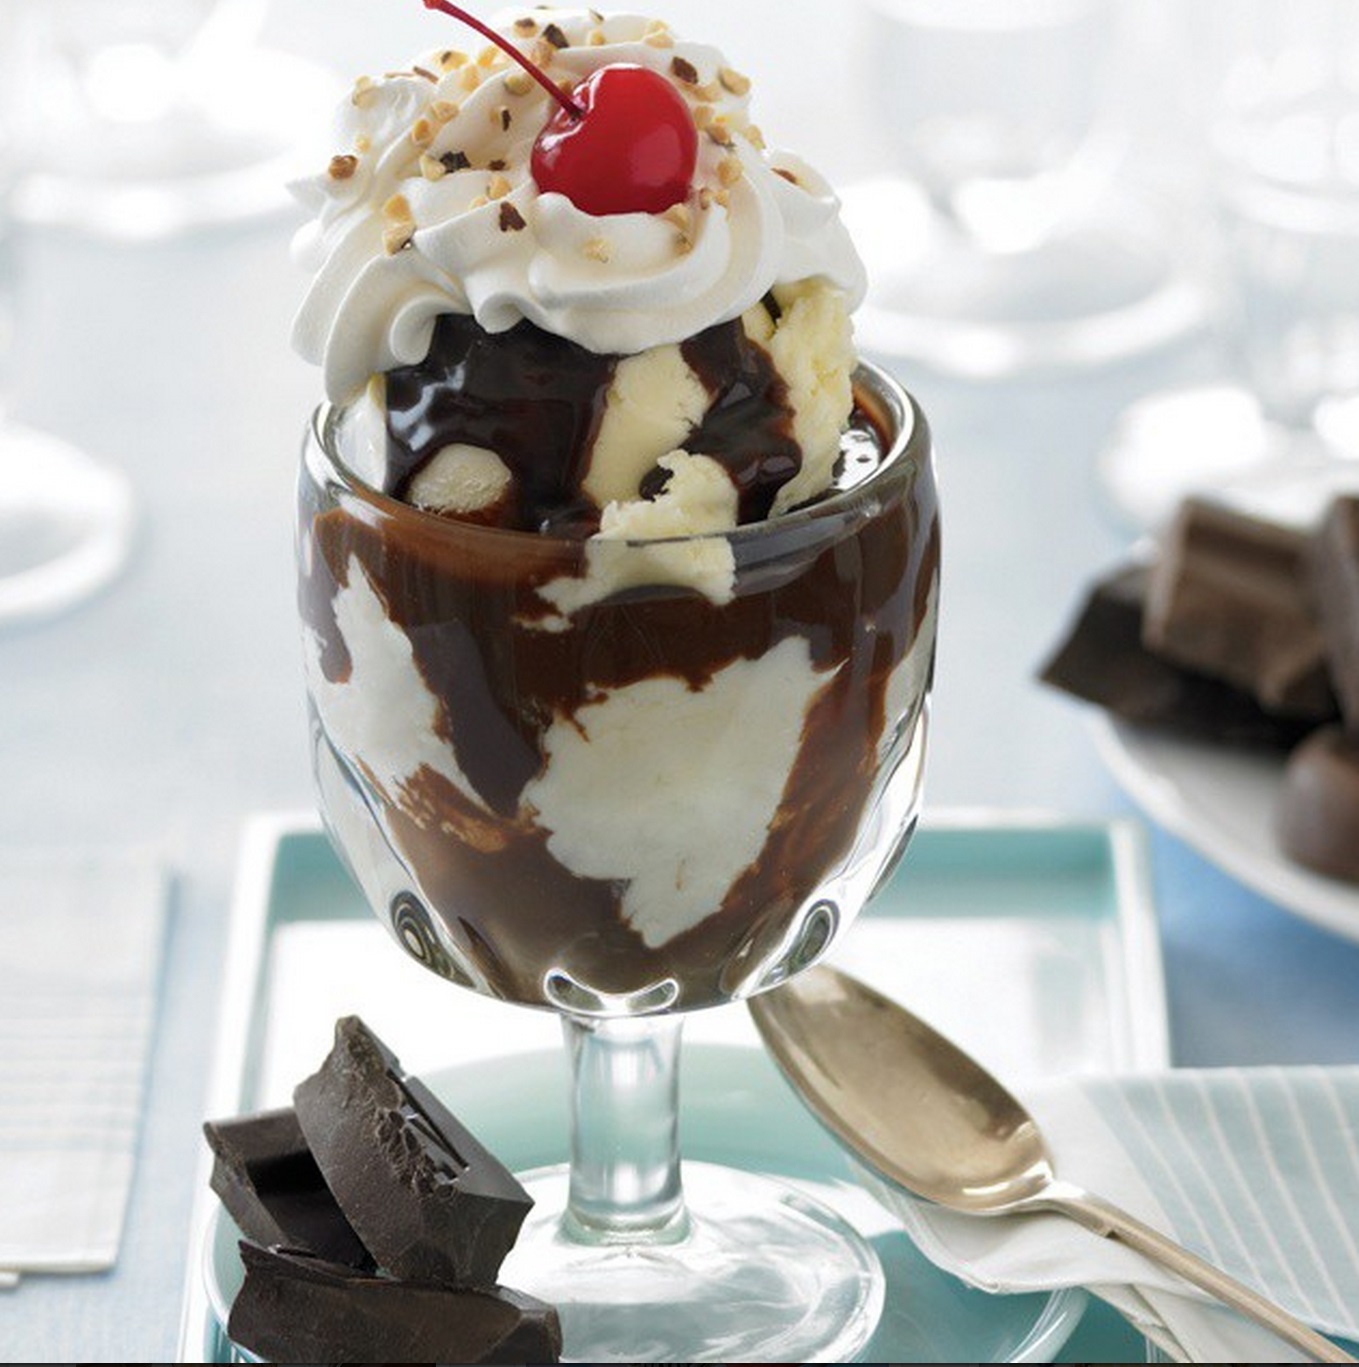 Giveaway: Ice Cream Sundaes from Ghirardelli